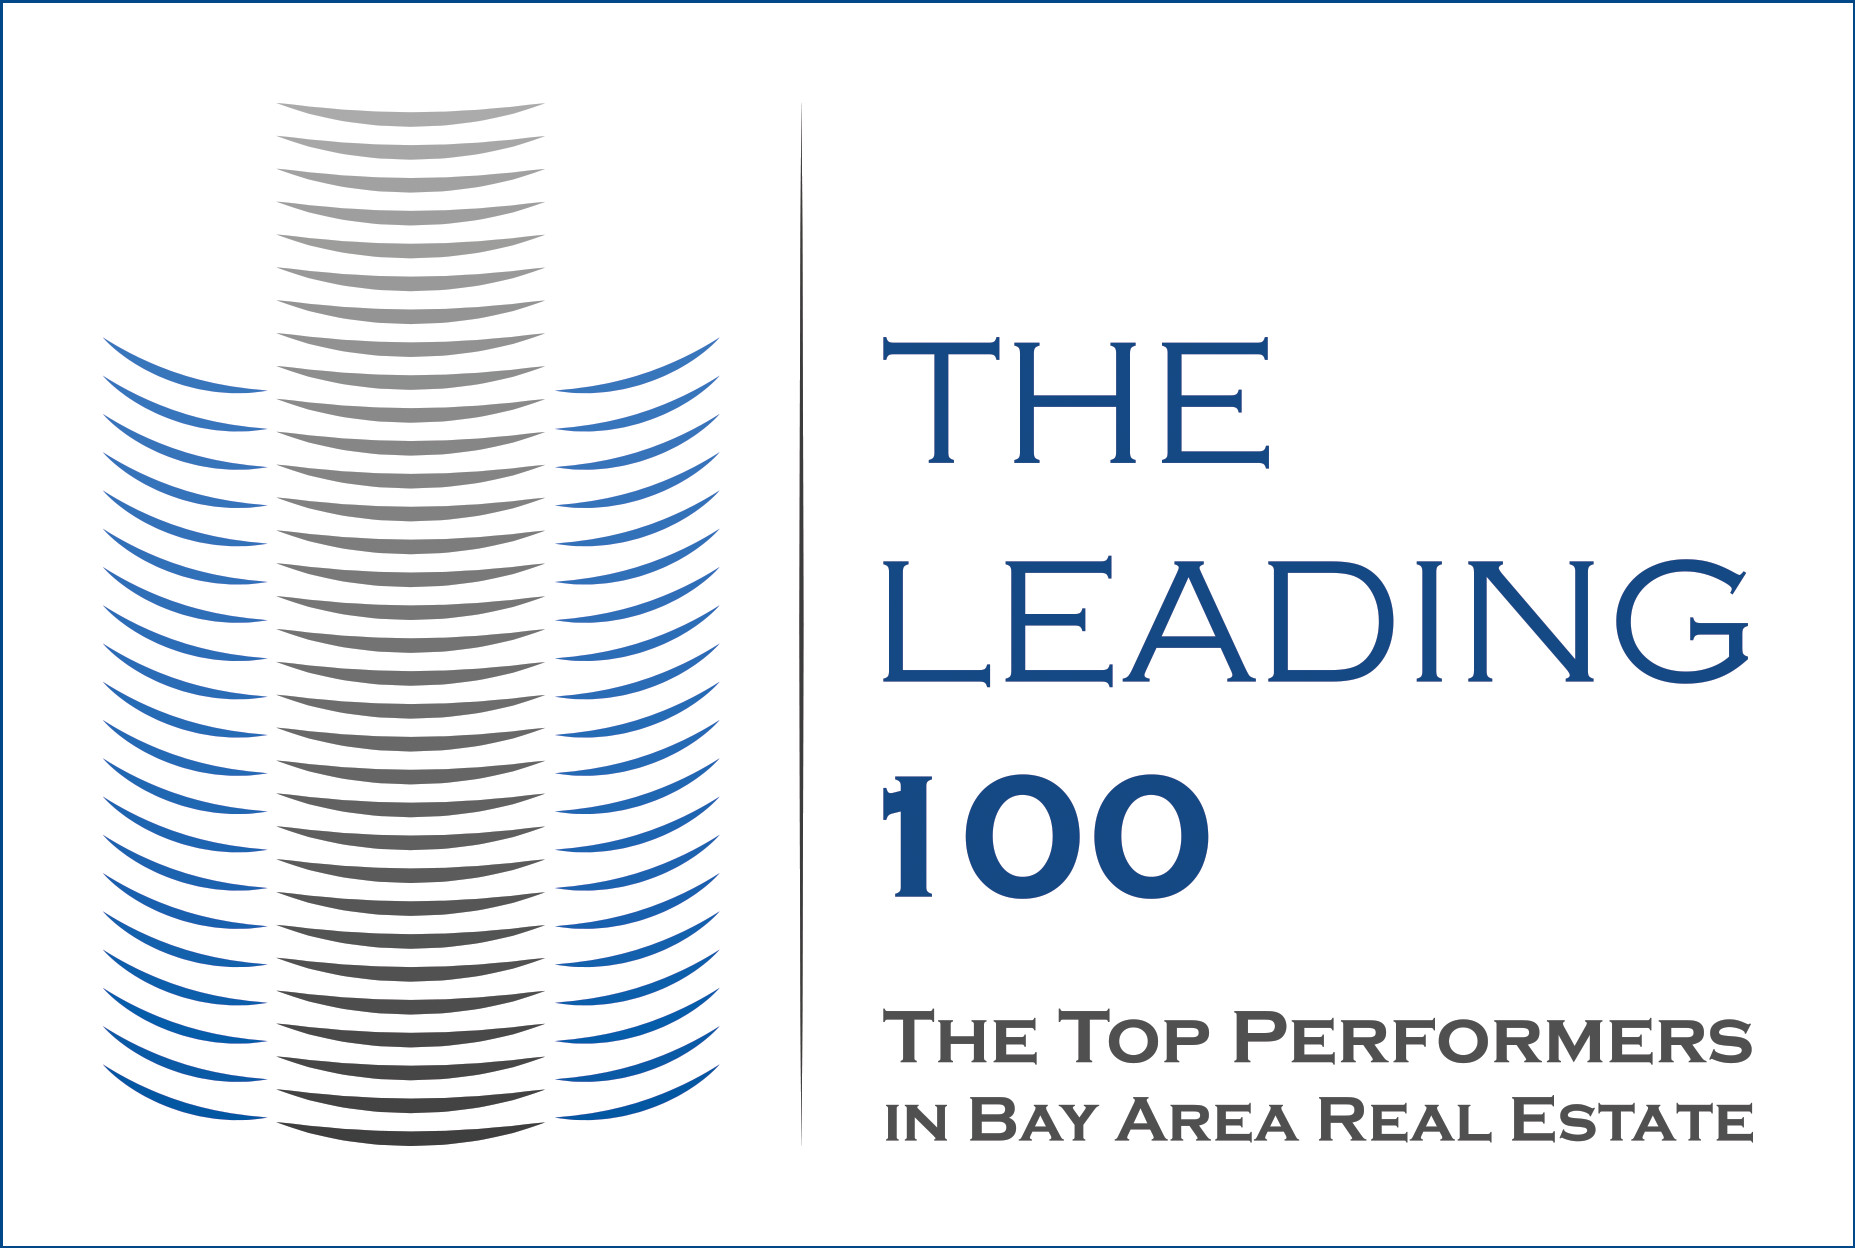 A text banner listing the leading performers in Bay Area real estate